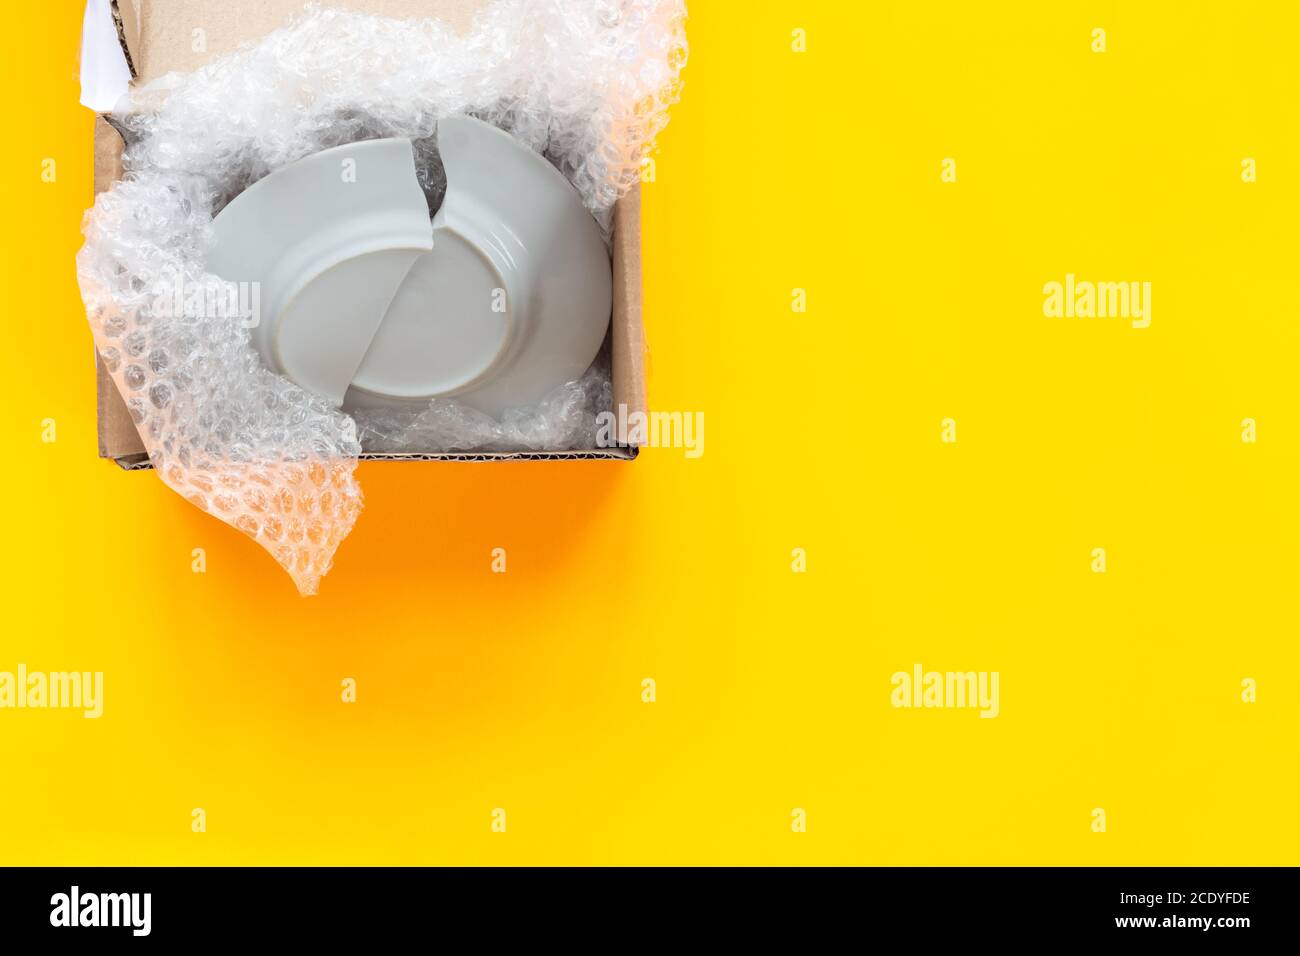 On a yellow background lies an open package, a box with a broken plate Stock Photo